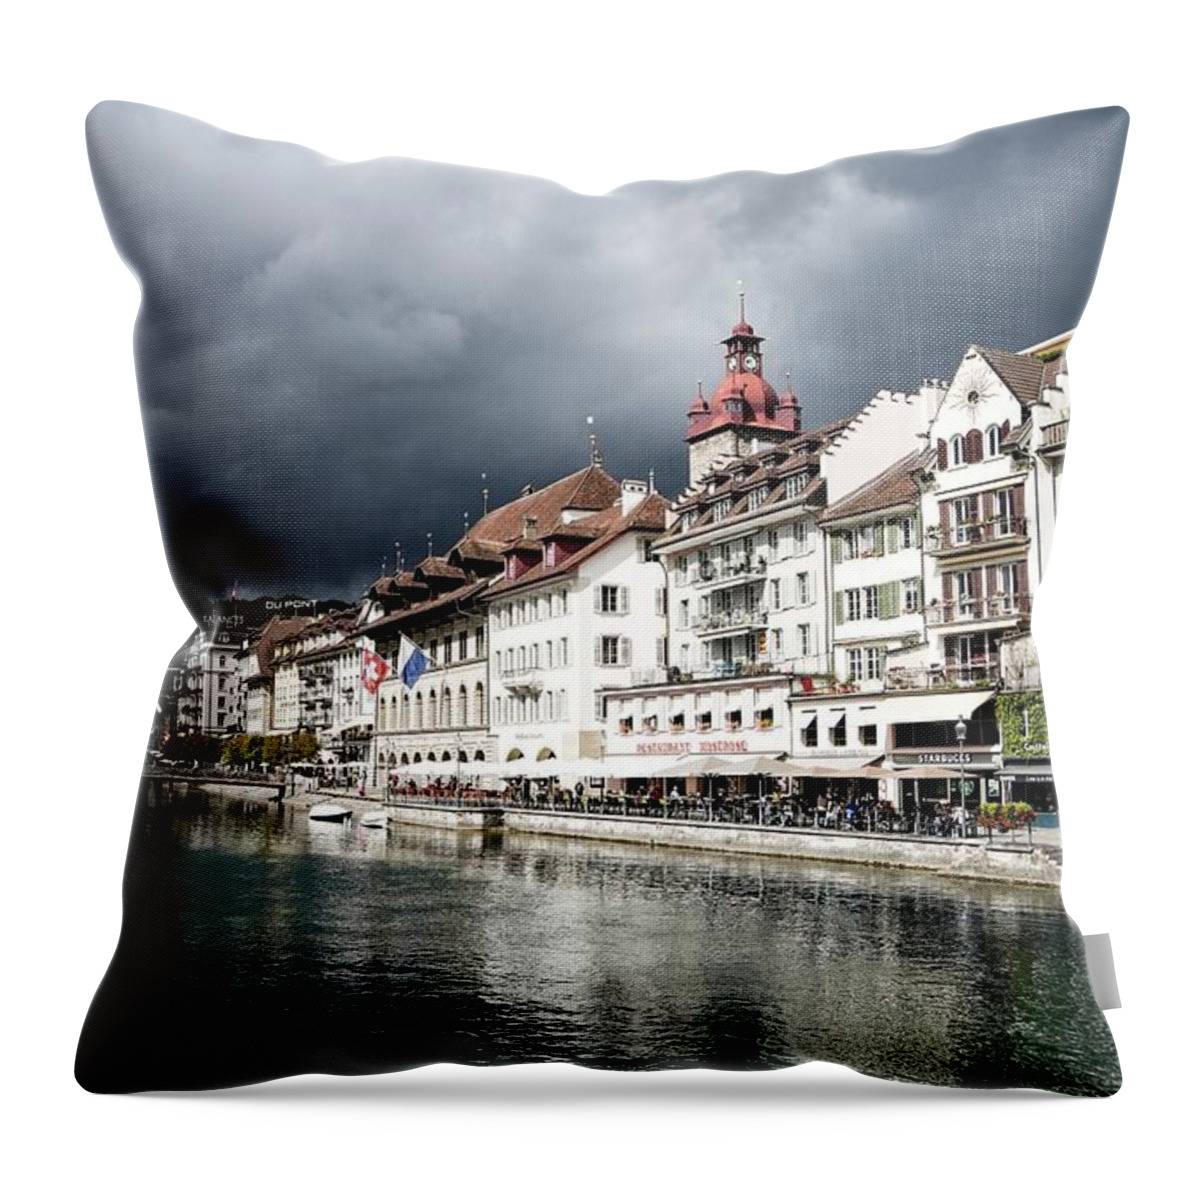 Town Hall Throw Pillow featuring the photograph Town Hall Luzern Switzerland by Claudia Zahnd-Prezioso